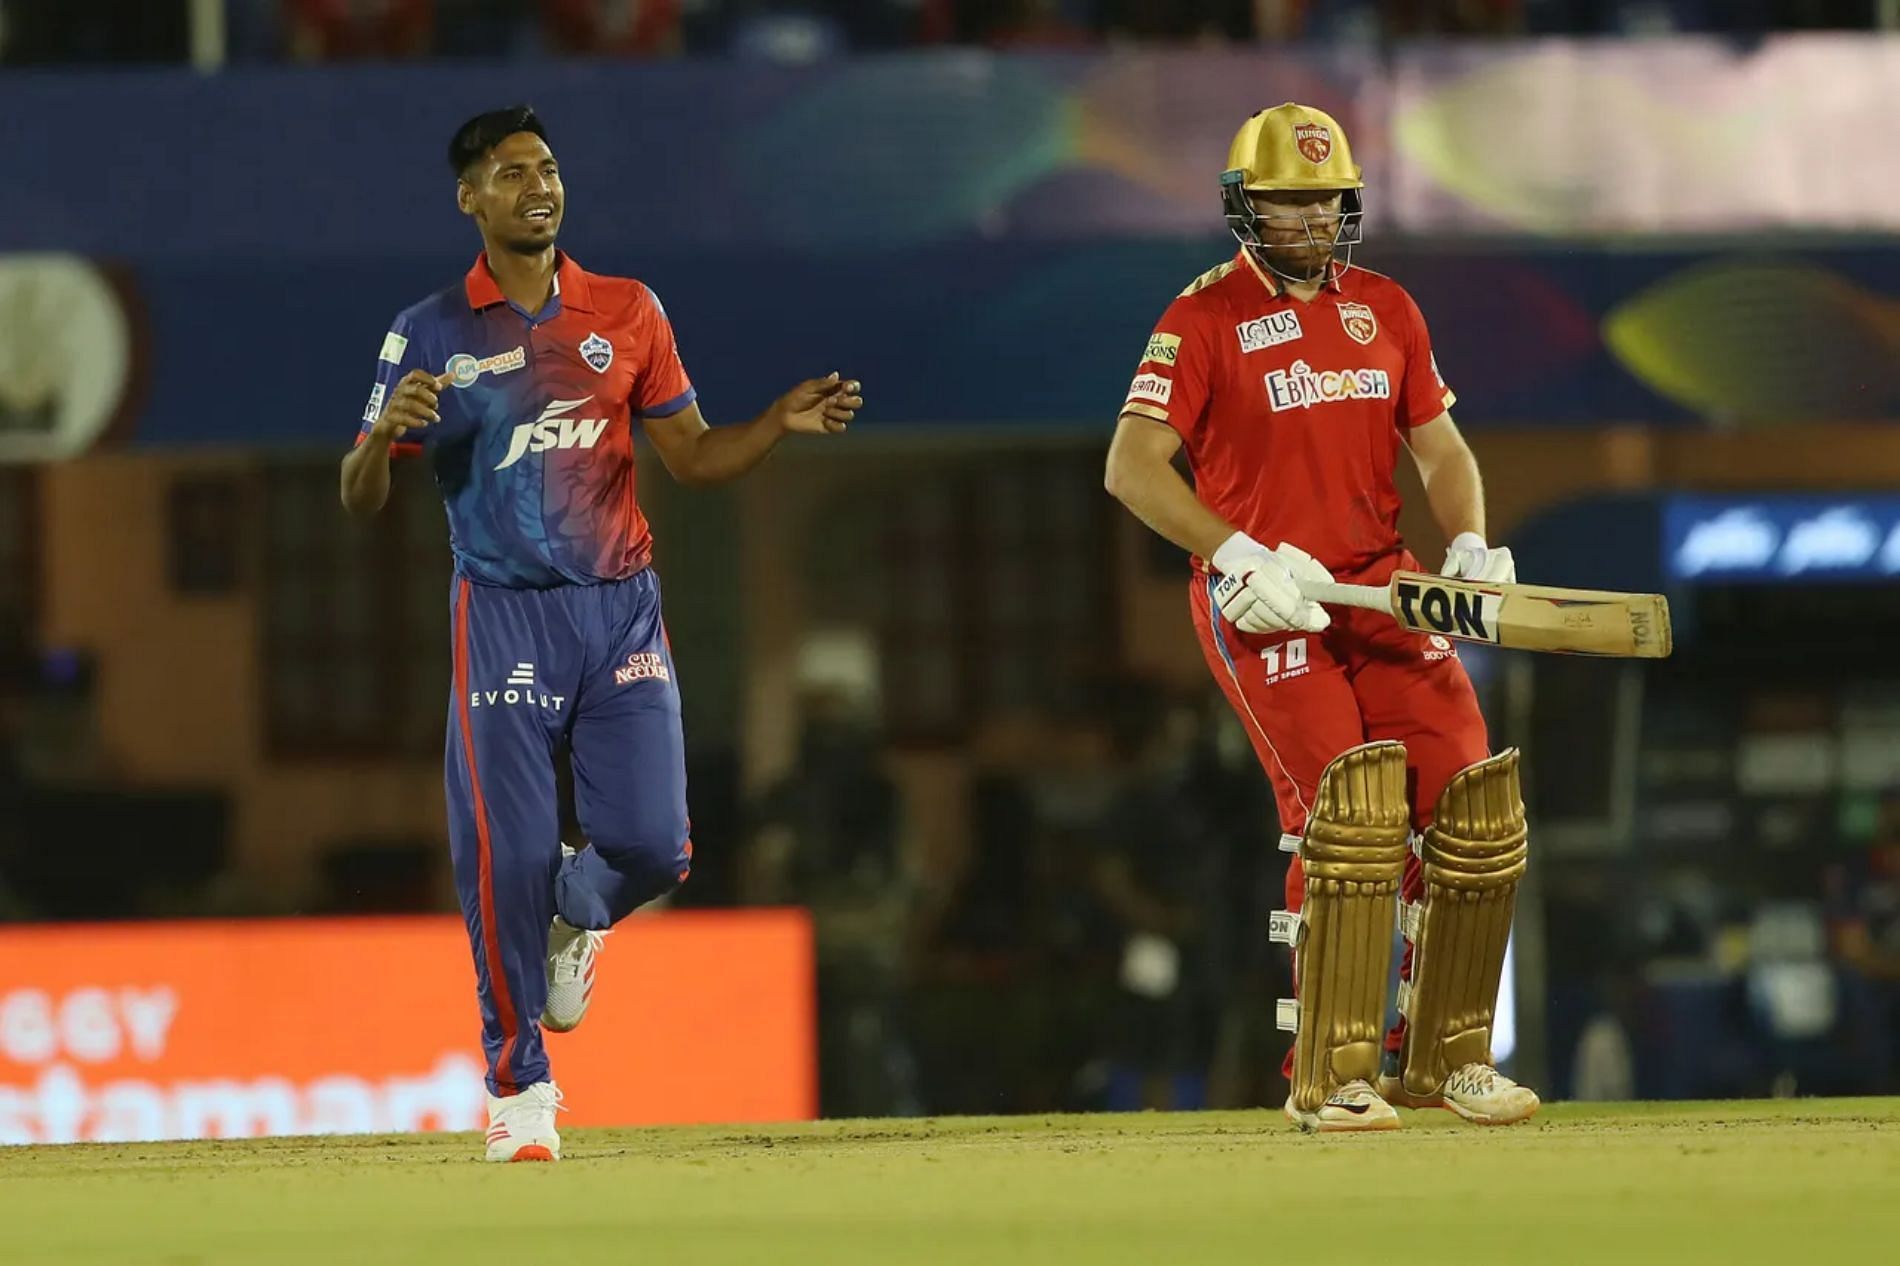 Jonny Bairstow (right) during the match against Delhi Capitals. Pic: IPLT20.COM